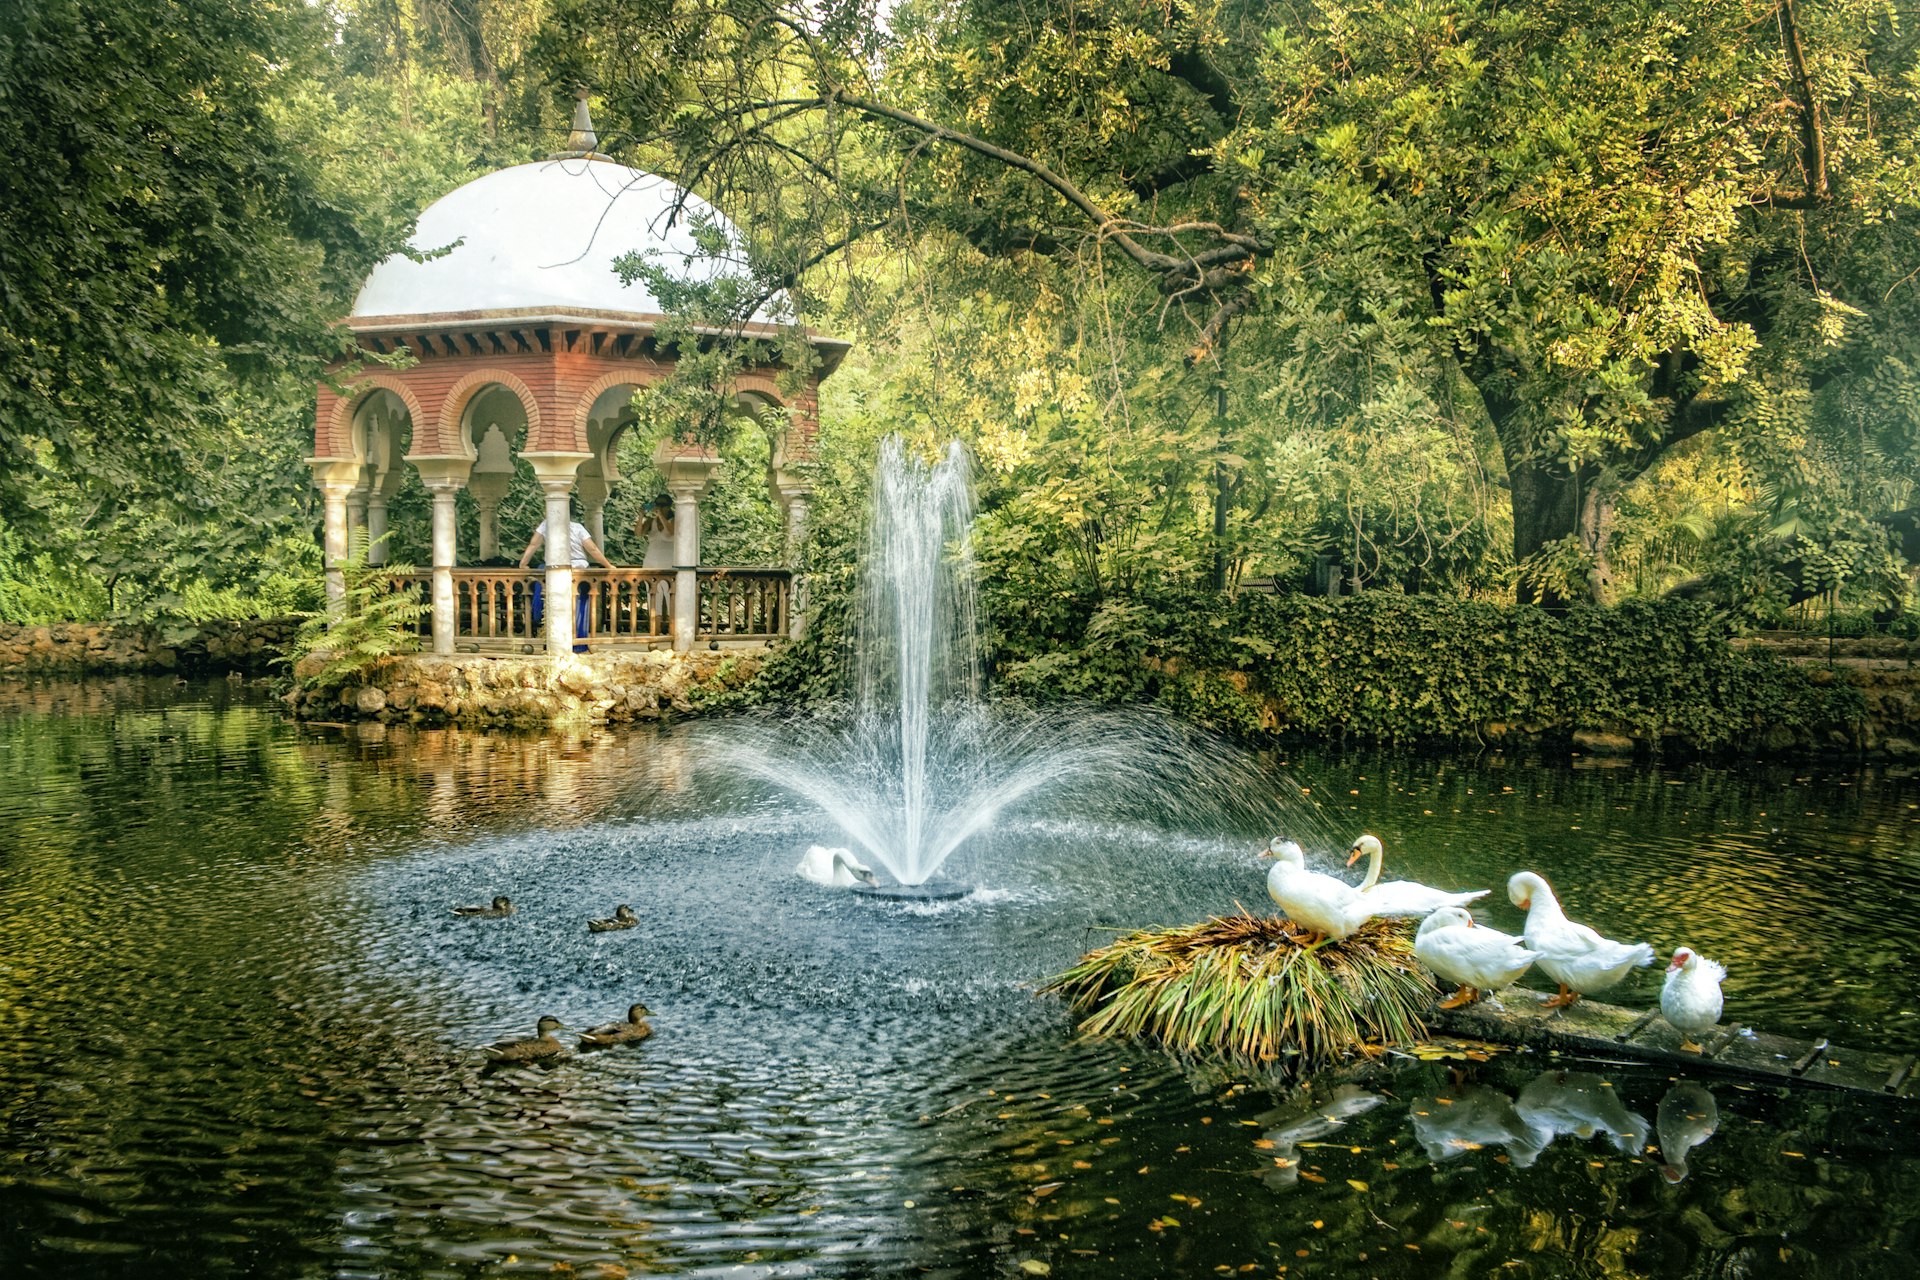 A Moorish-style pavilion by a pond with white ducks at María Luisa Park, Seville, Spain